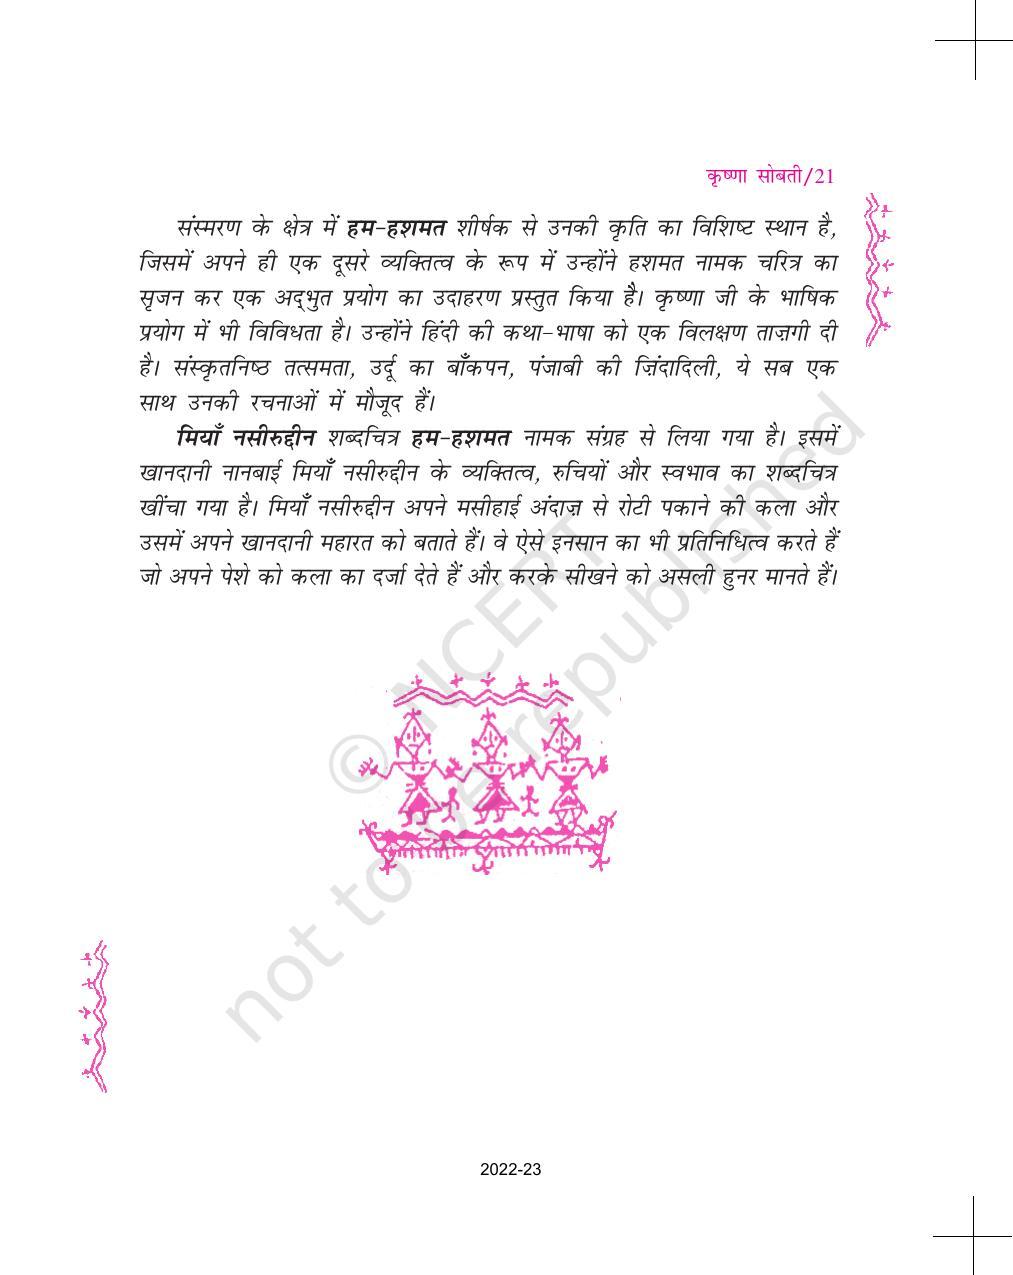 NCERT Book for Class 11 Hindi Aroh Chapter 2 मियाँ नसीरुद्दीन - Page 2